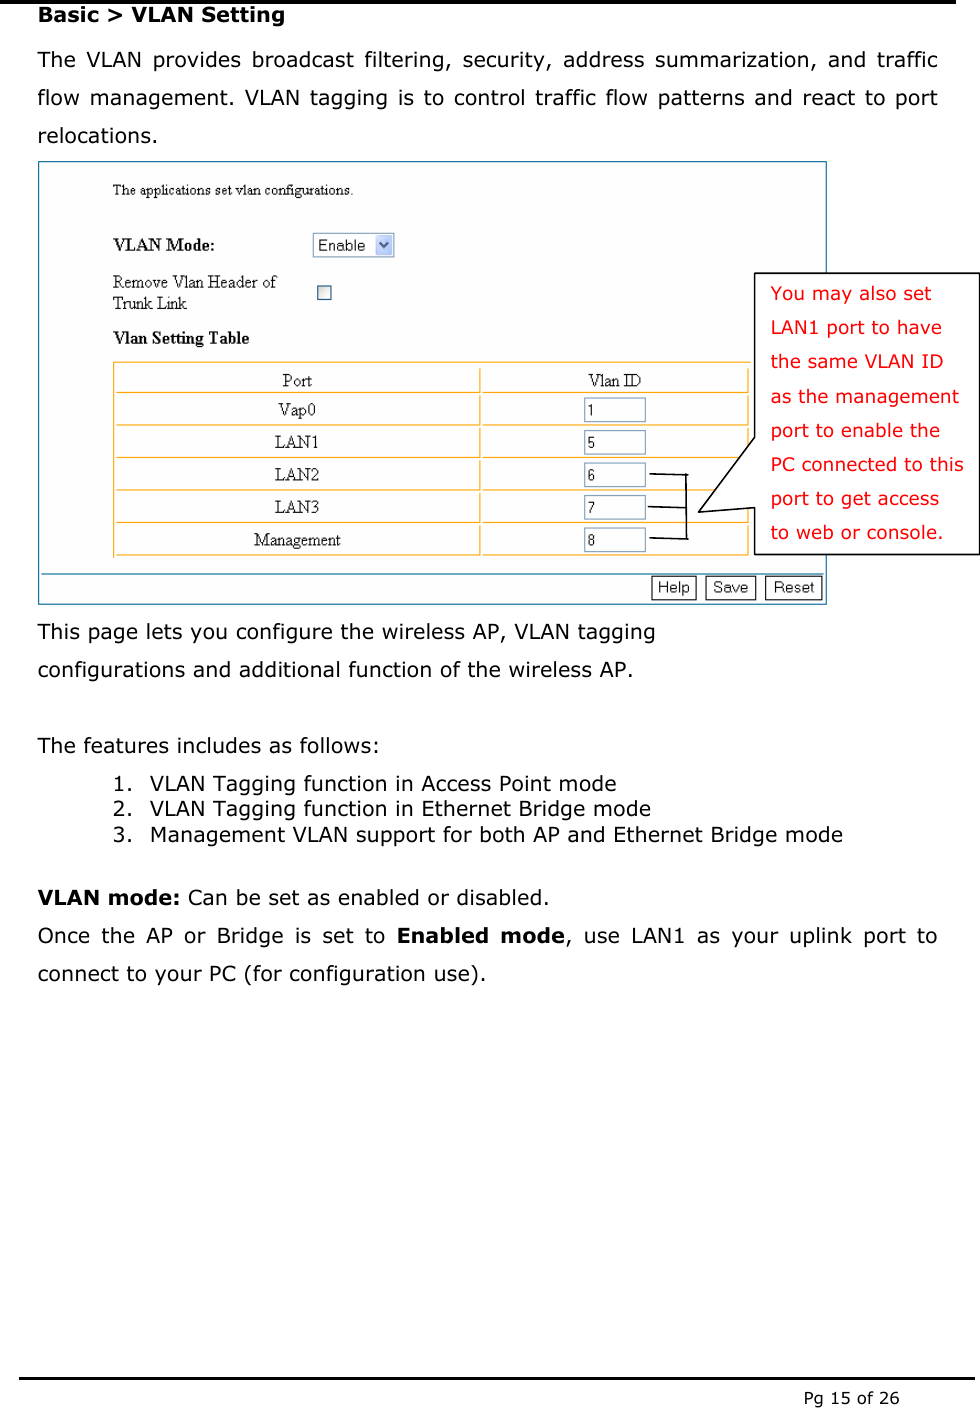  Pg 15 of 26 Basic &gt; VLAN Setting The VLAN provides broadcast filtering, security, address summarization, and traffic flow management. VLAN tagging is to control traffic flow patterns and react to port relocations.  This page lets you configure the wireless AP, VLAN tagging  configurations and additional function of the wireless AP.   The features includes as follows: 1. VLAN Tagging function in Access Point mode 2. VLAN Tagging function in Ethernet Bridge mode 3. Management VLAN support for both AP and Ethernet Bridge mode  VLAN mode: Can be set as enabled or disabled. Once the AP or Bridge is set to Enabled mode, use LAN1 as your uplink port to connect to your PC (for configuration use).        You may also set LAN1 port to have the same VLAN ID as the management port to enable the PC connected to this port to get access to web or console. 